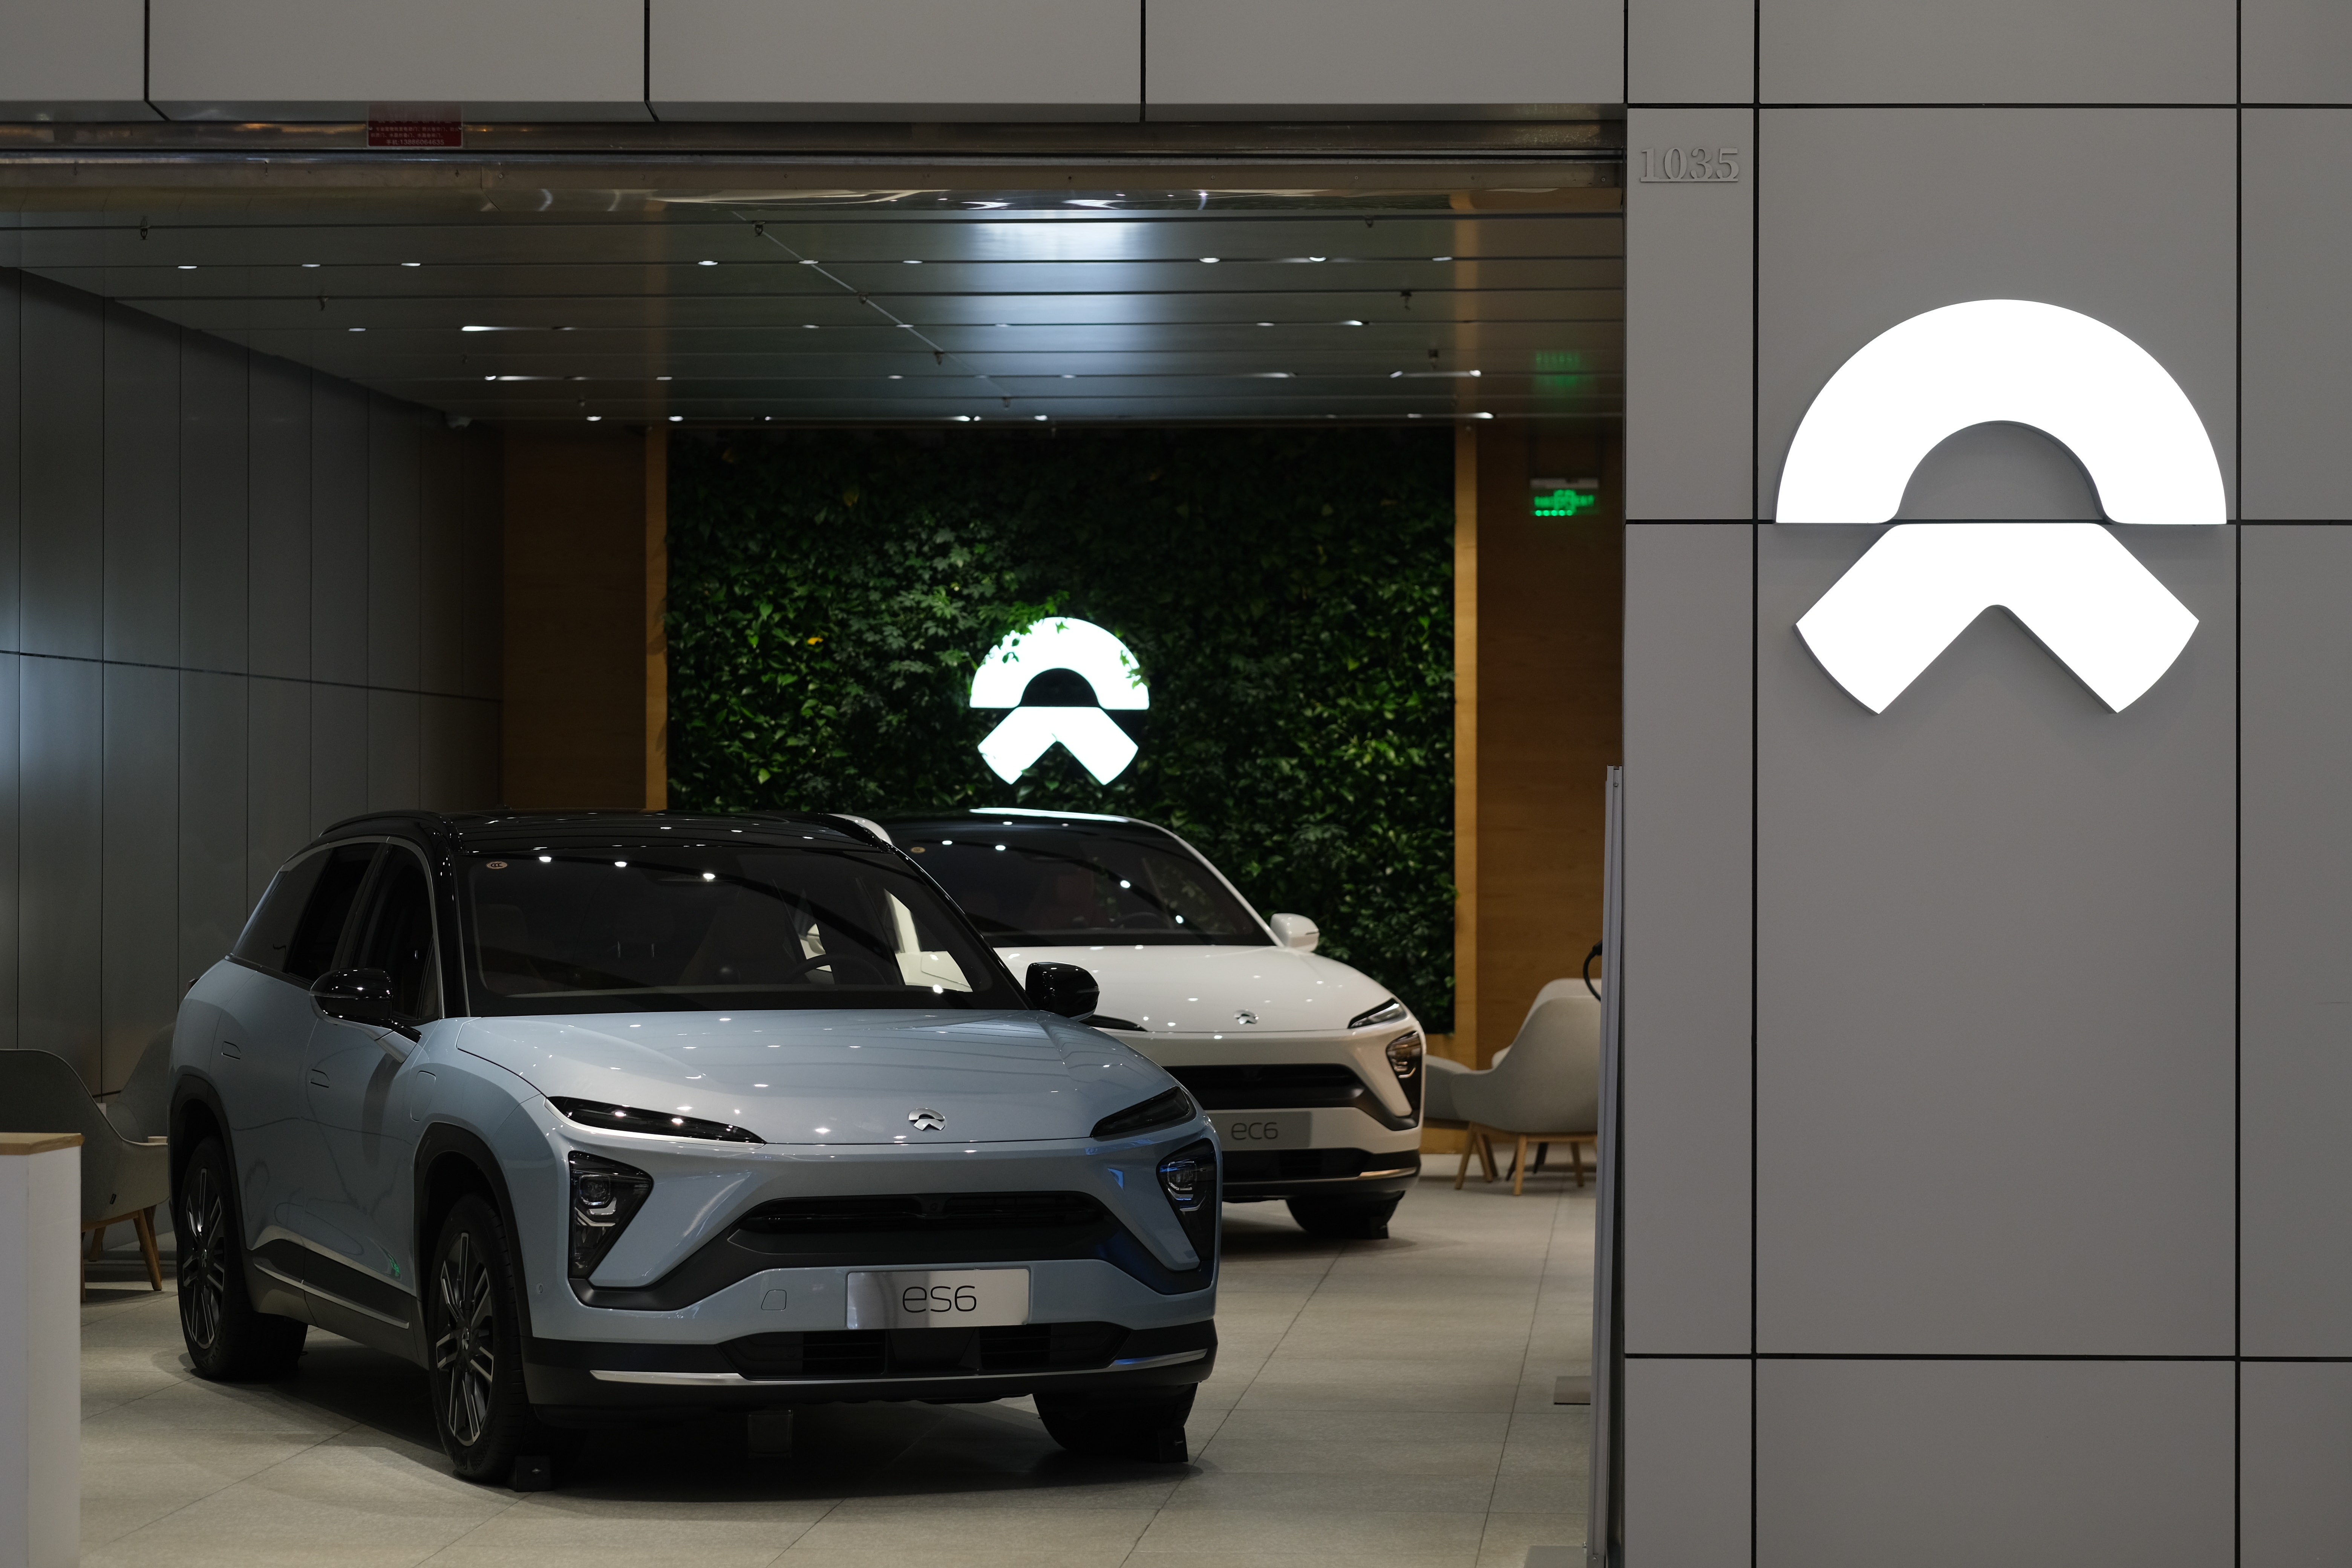 Nio's August EV Deliveries Rise, Bucking Wider Trend As Rivals Xpeng, Li Auto See Numbers Fall Sequentially